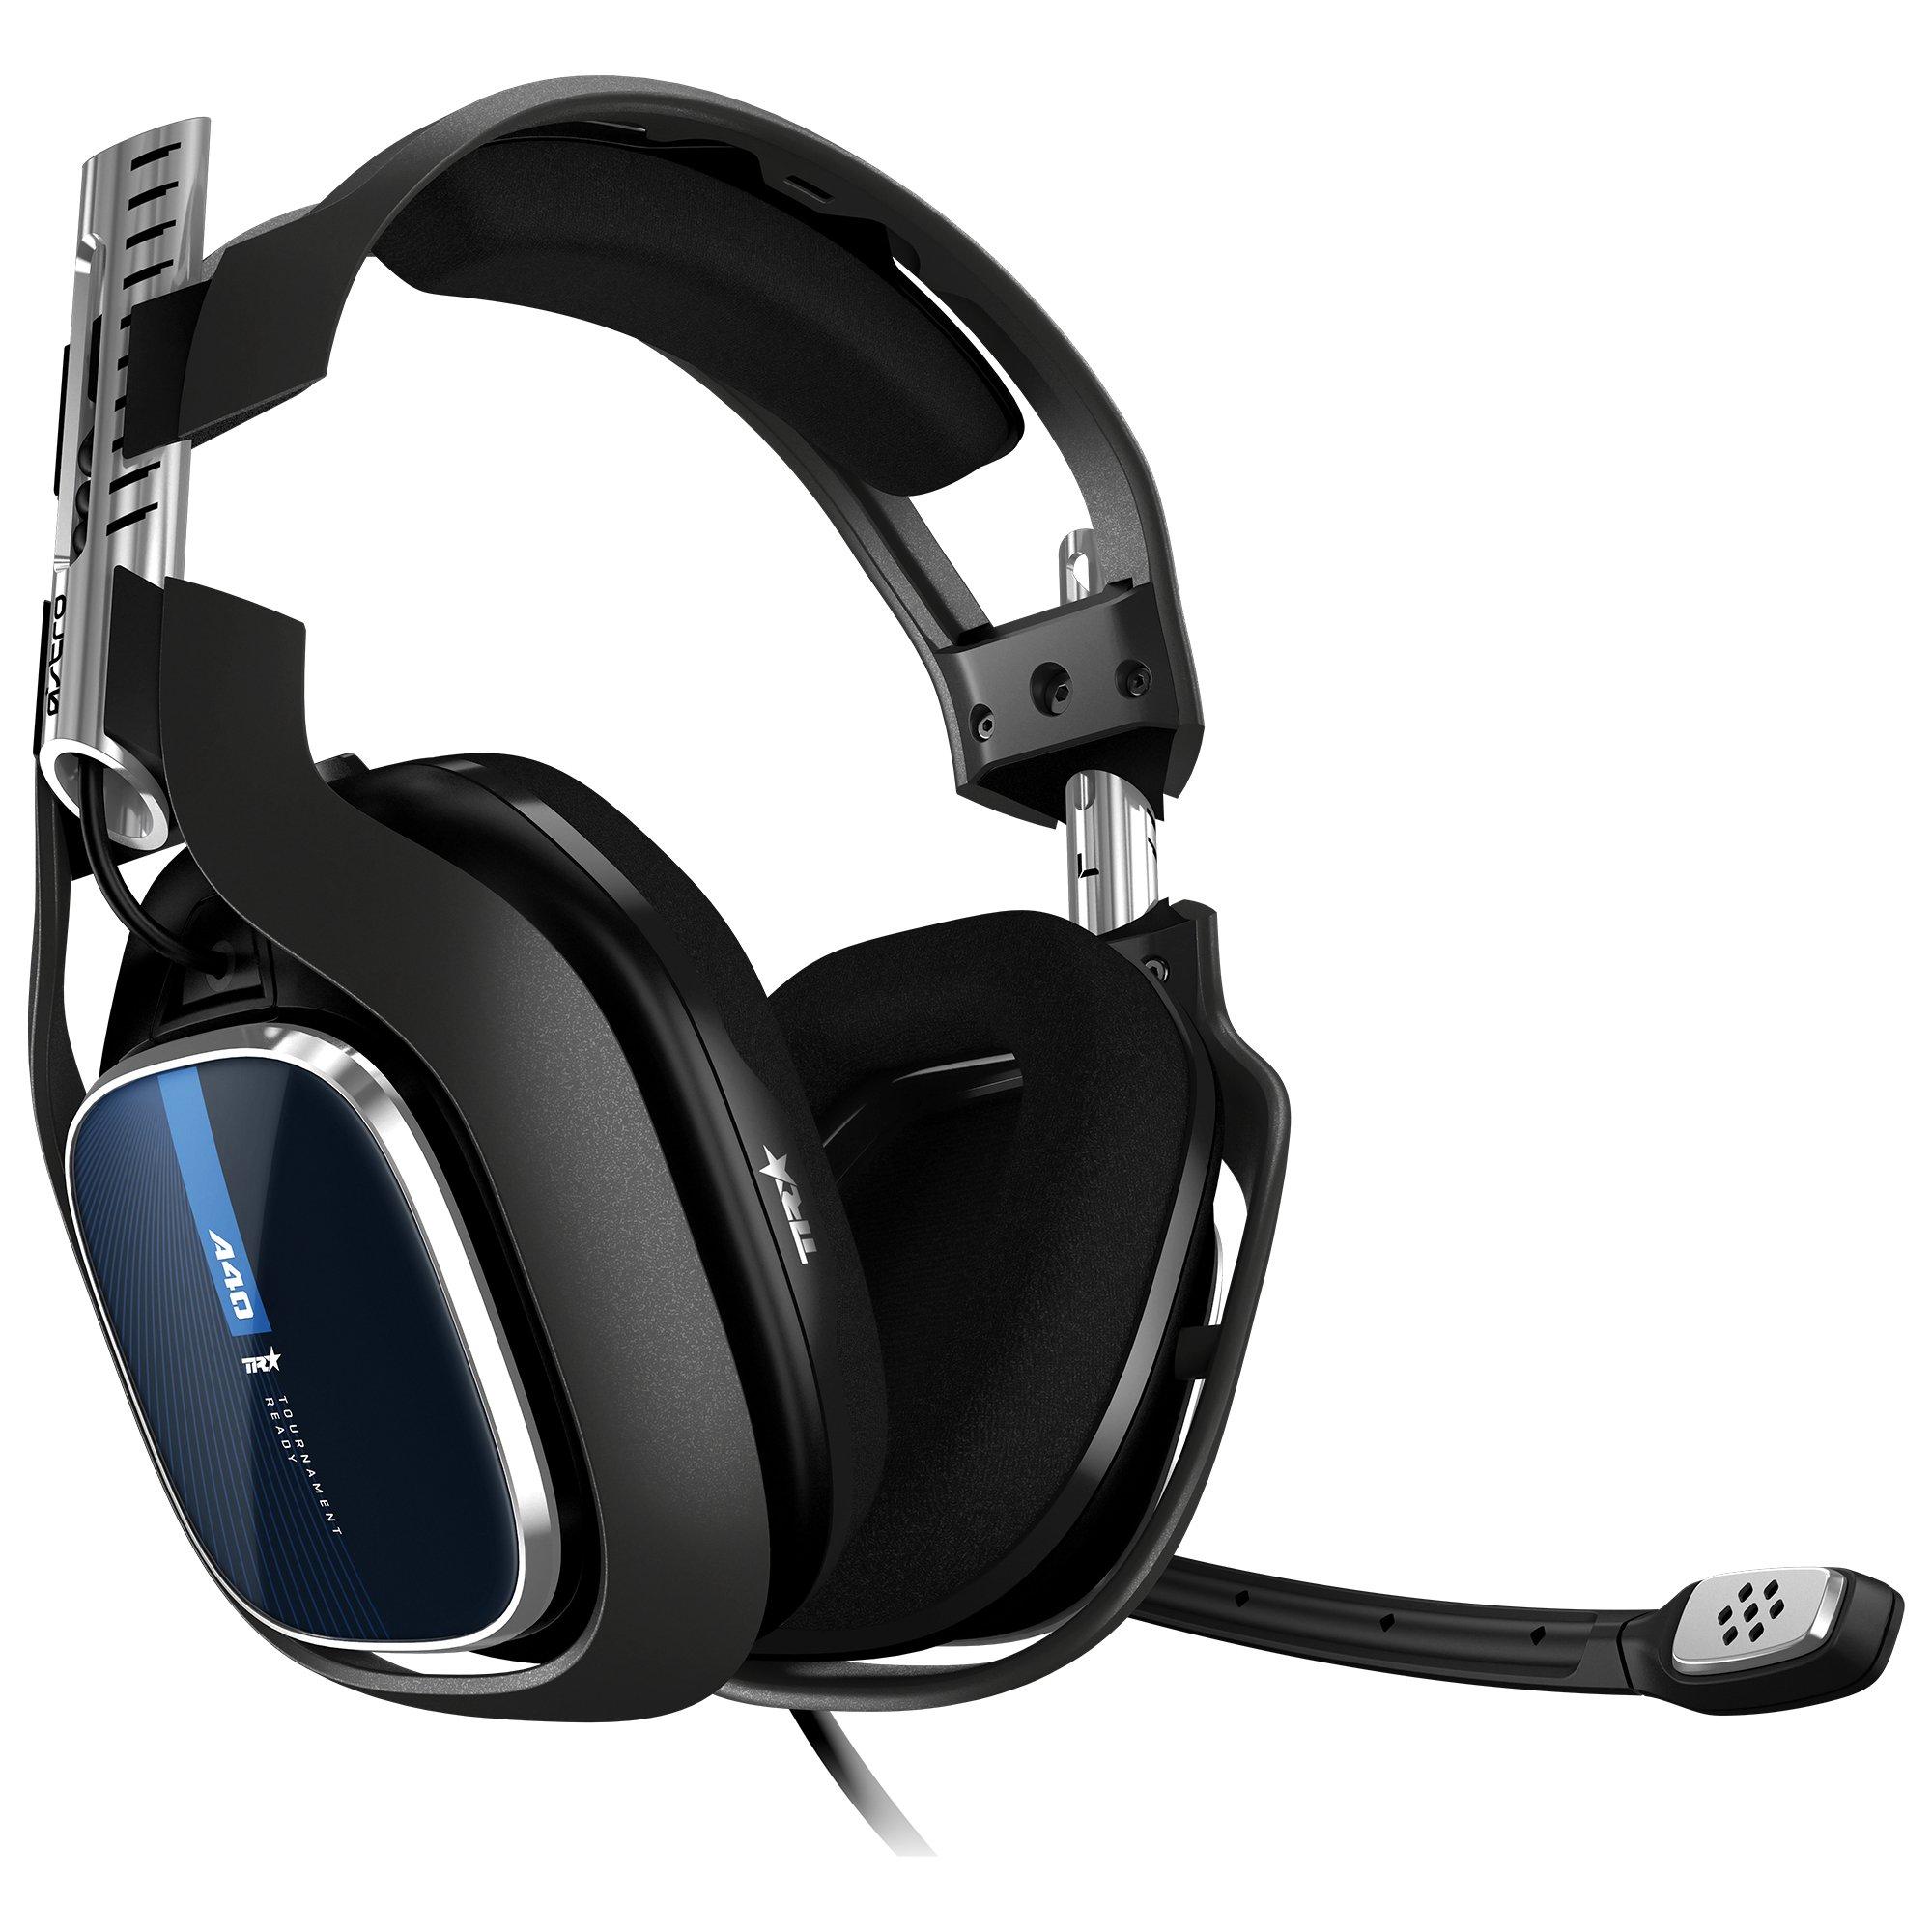 list item 14 of 16 Astro Gaming A40 Tournament Ready Wired Headset and PRO Gen 2 MixAmp for PlayStation 4